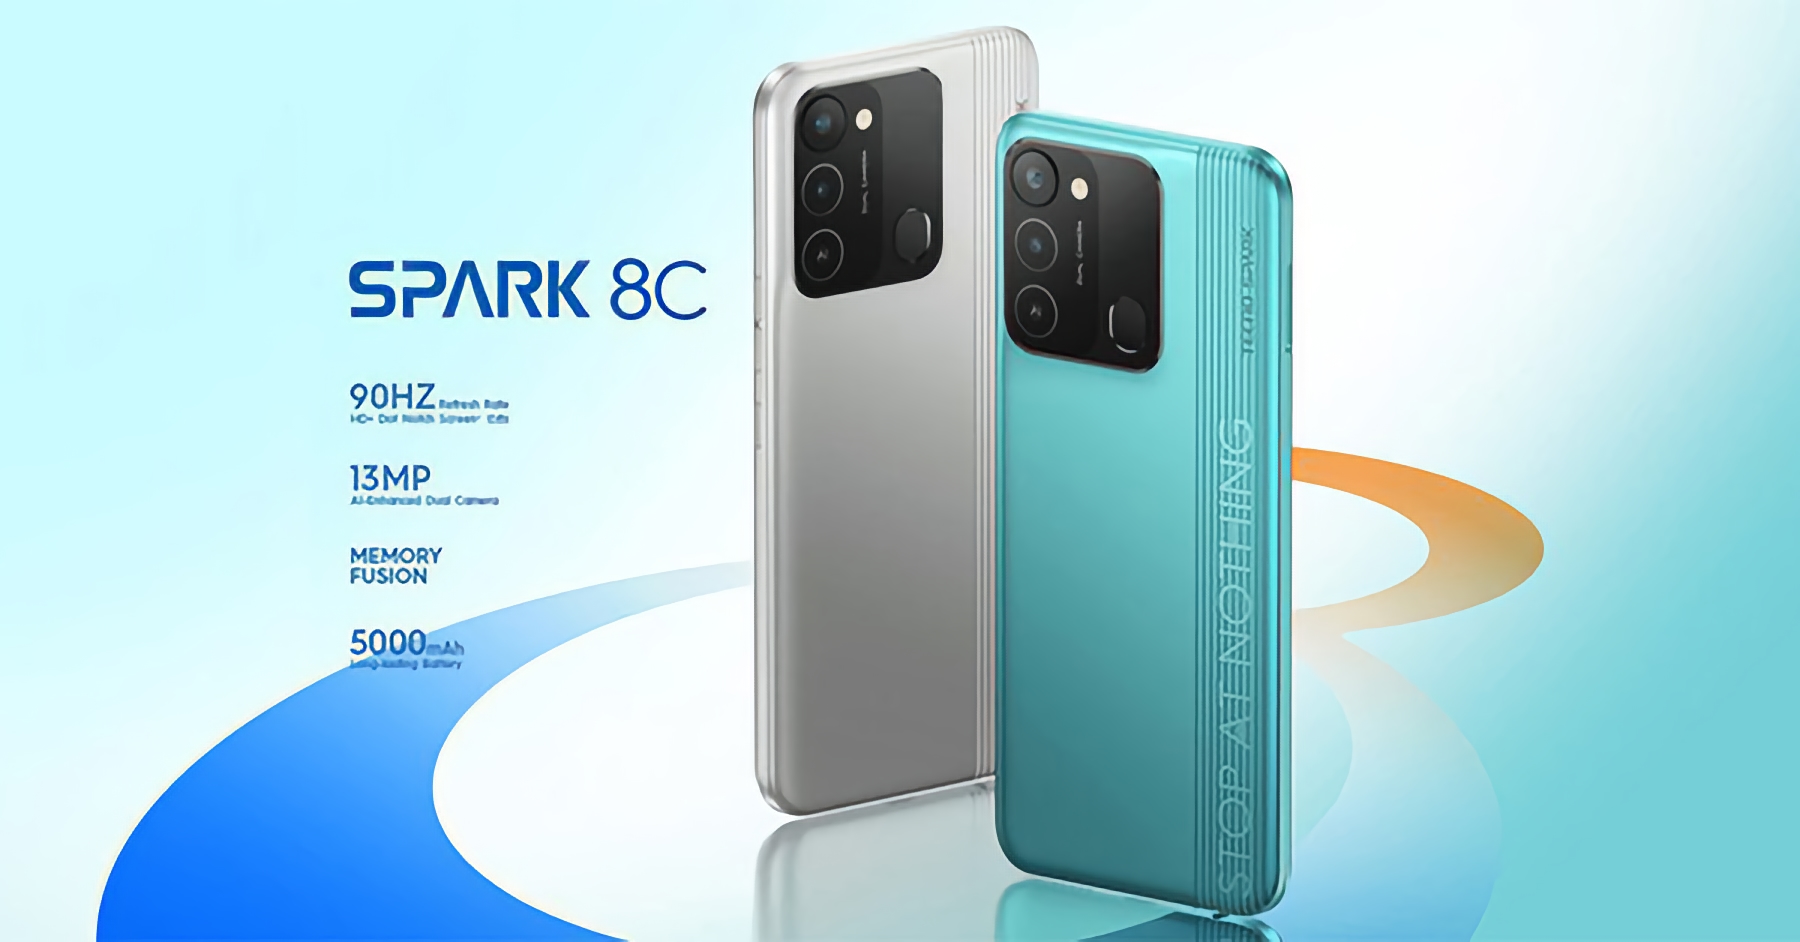 Tecno Spark 8C: 90Hz screen, 5000mAh battery, NFC and DTS-enabled speakers for $120